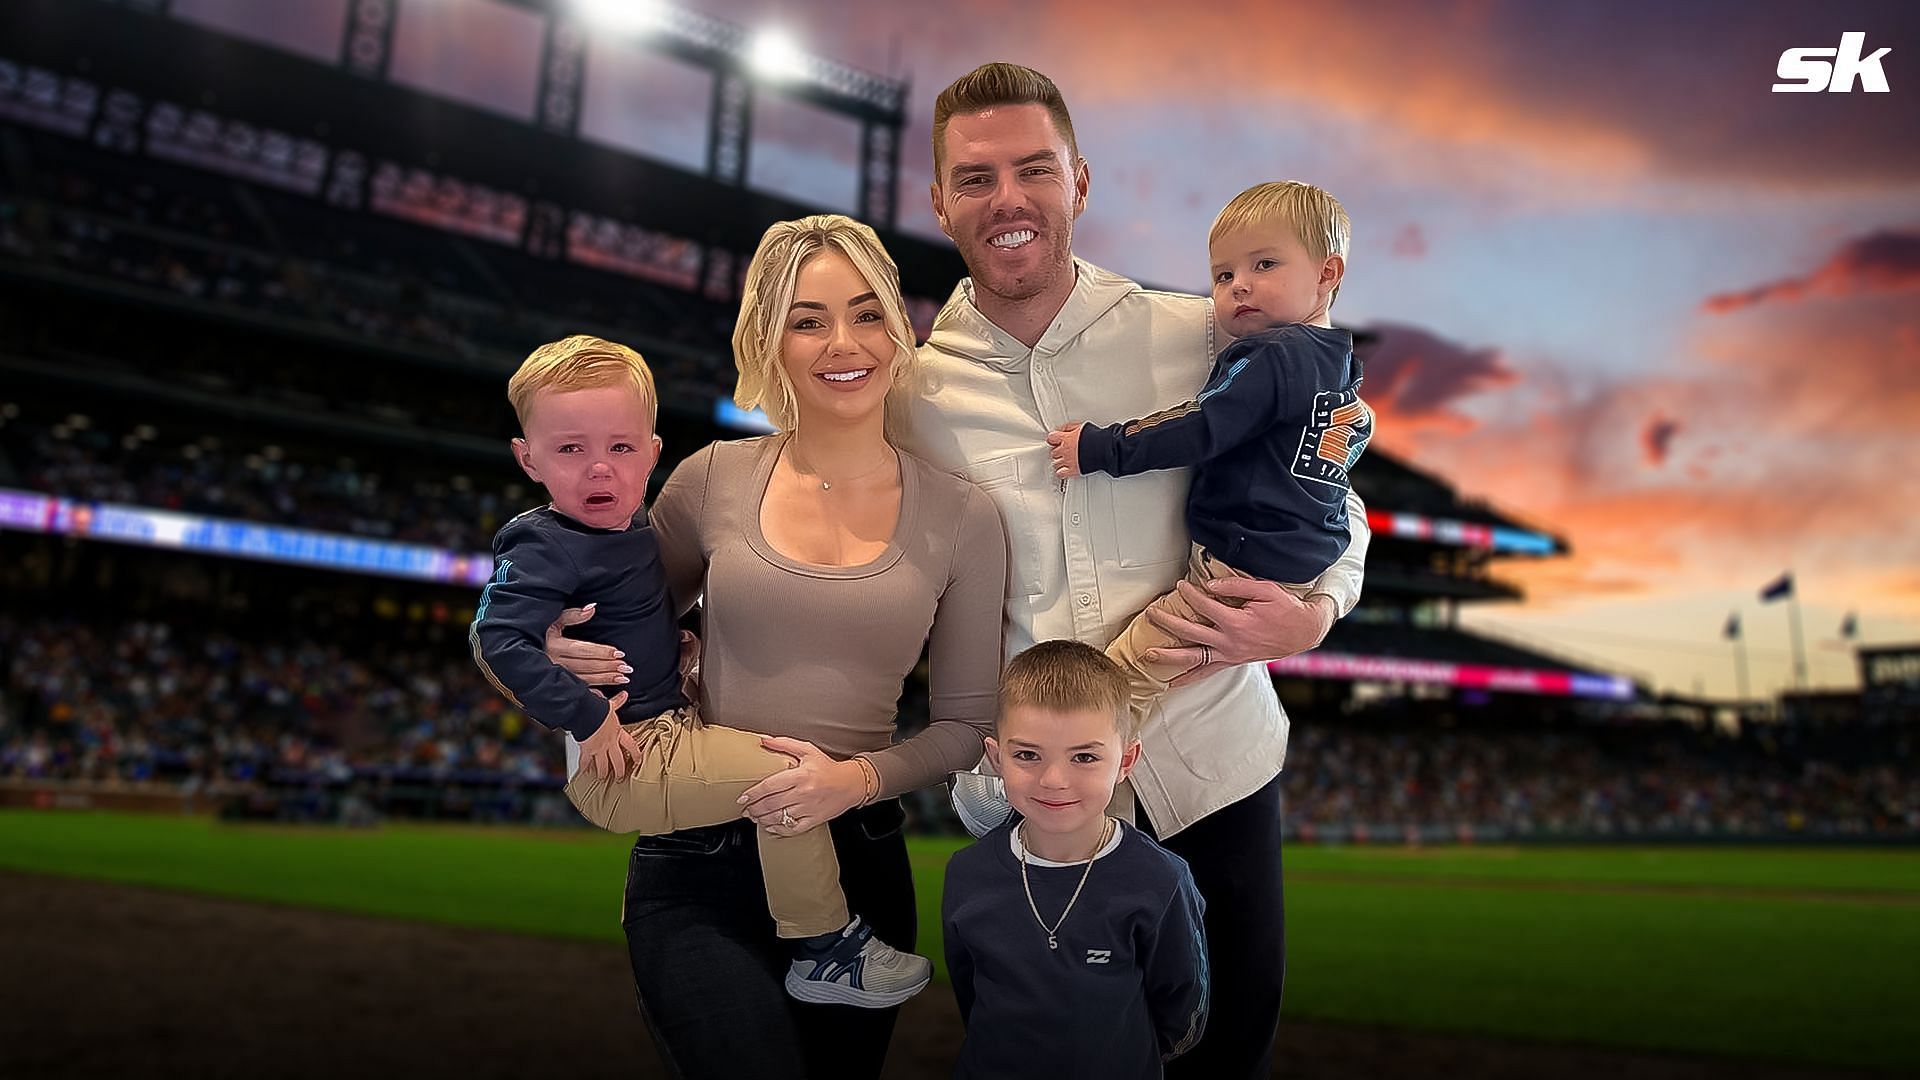 Freddie Freeman with his beautiful family.